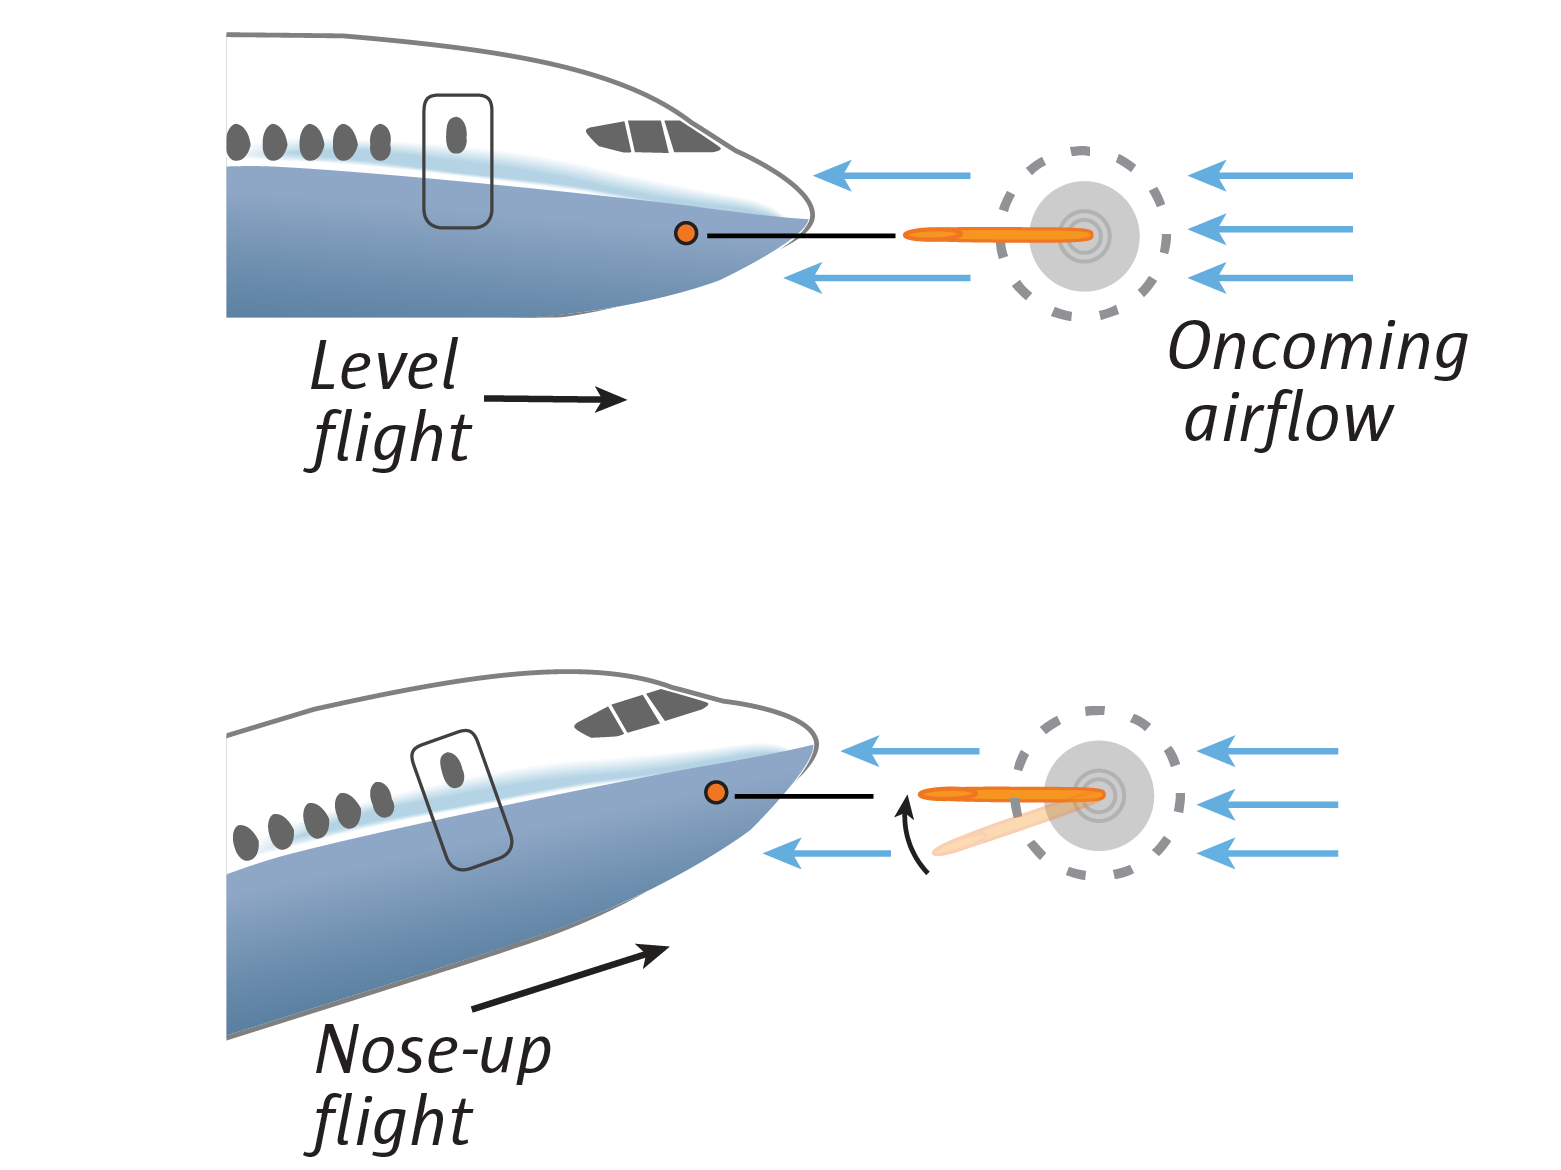 Two planes. One is in level flight, so the vane in the angle-of-attack sensor is horizontal. The second plane is in nose-up flight, so oncoming airflow causes the vane to point downward, at an angle.